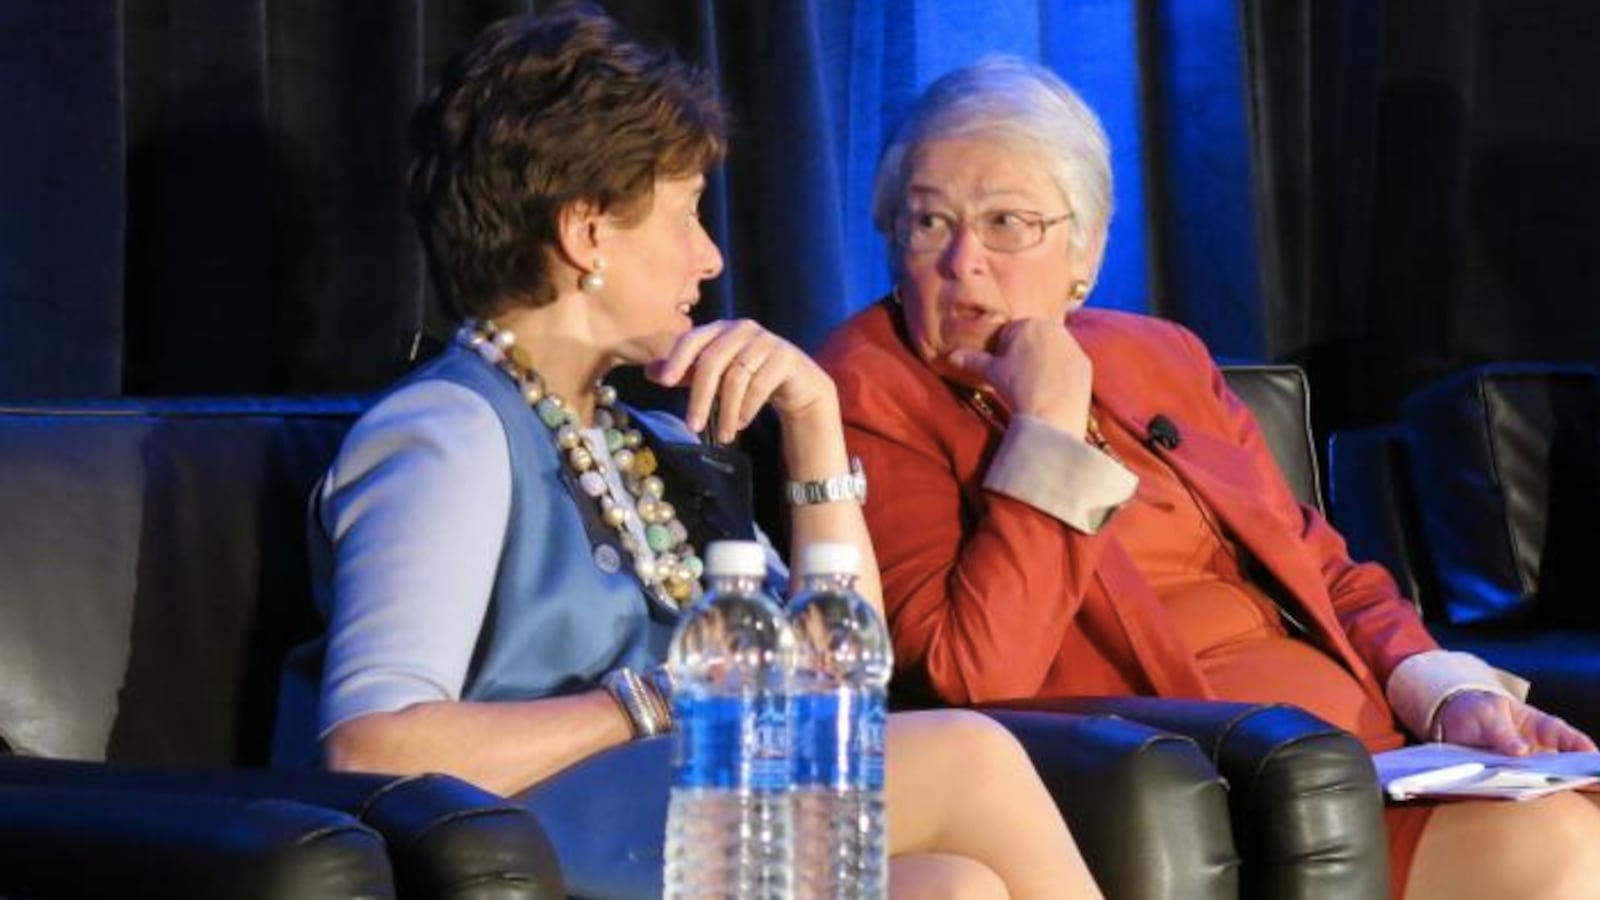 Board of Regents Chancellor Merryl Tisch, left, is pushing the city's education department under Carmen Fariña to be tougher on low-performing charter schools.